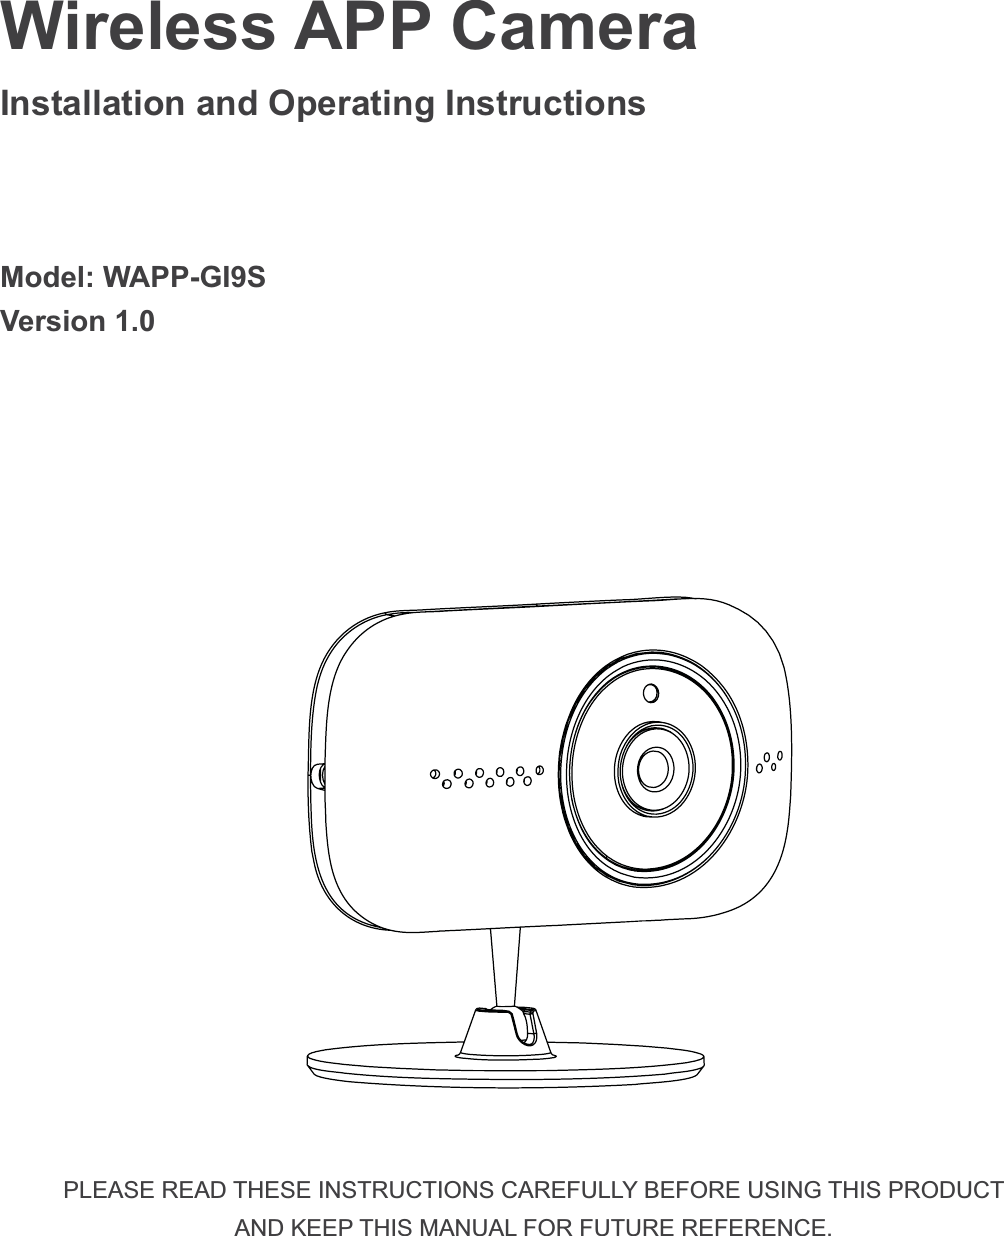 Wireless APP Camera  Installation and Operating Instructions Model: WAPP-GI9SVersion 1.0 PLEASE READ THESE INSTRUCTIONS CAREFULLY BEFORE USING THIS PRODUCT AND KEEP THIS MANUAL FOR FUTURE REFERENCE.